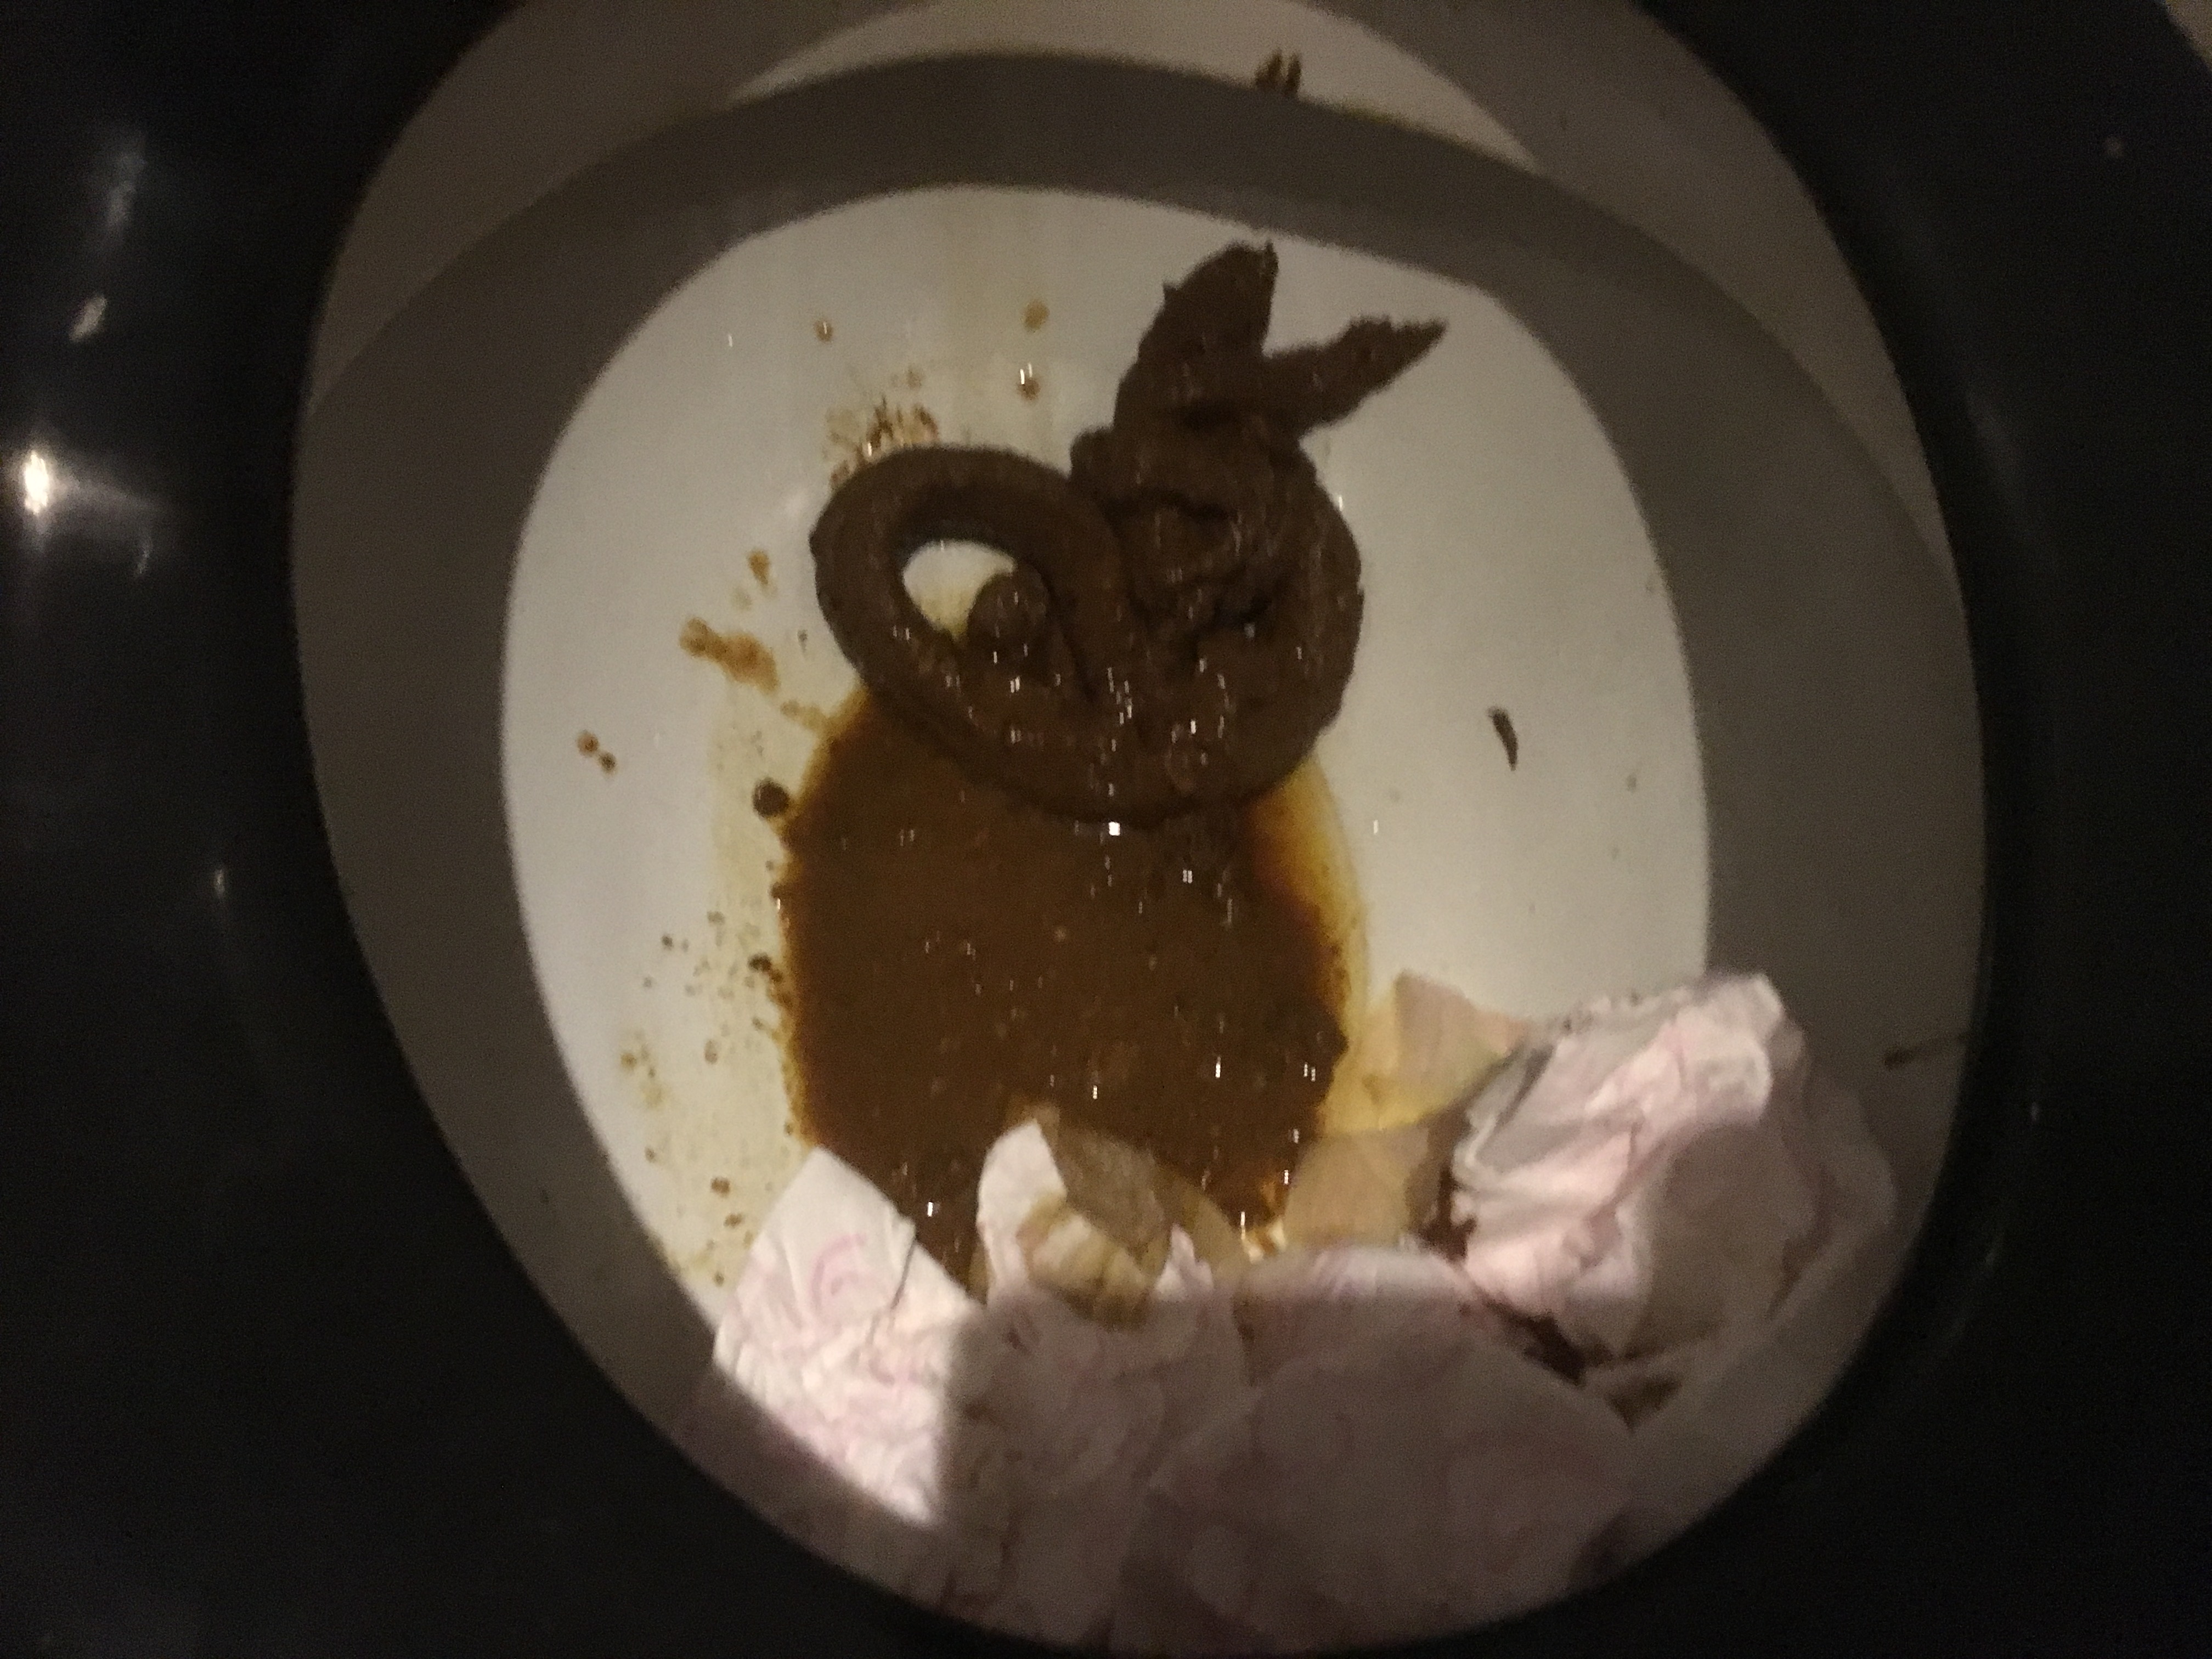 shitting second time 10/18/2017